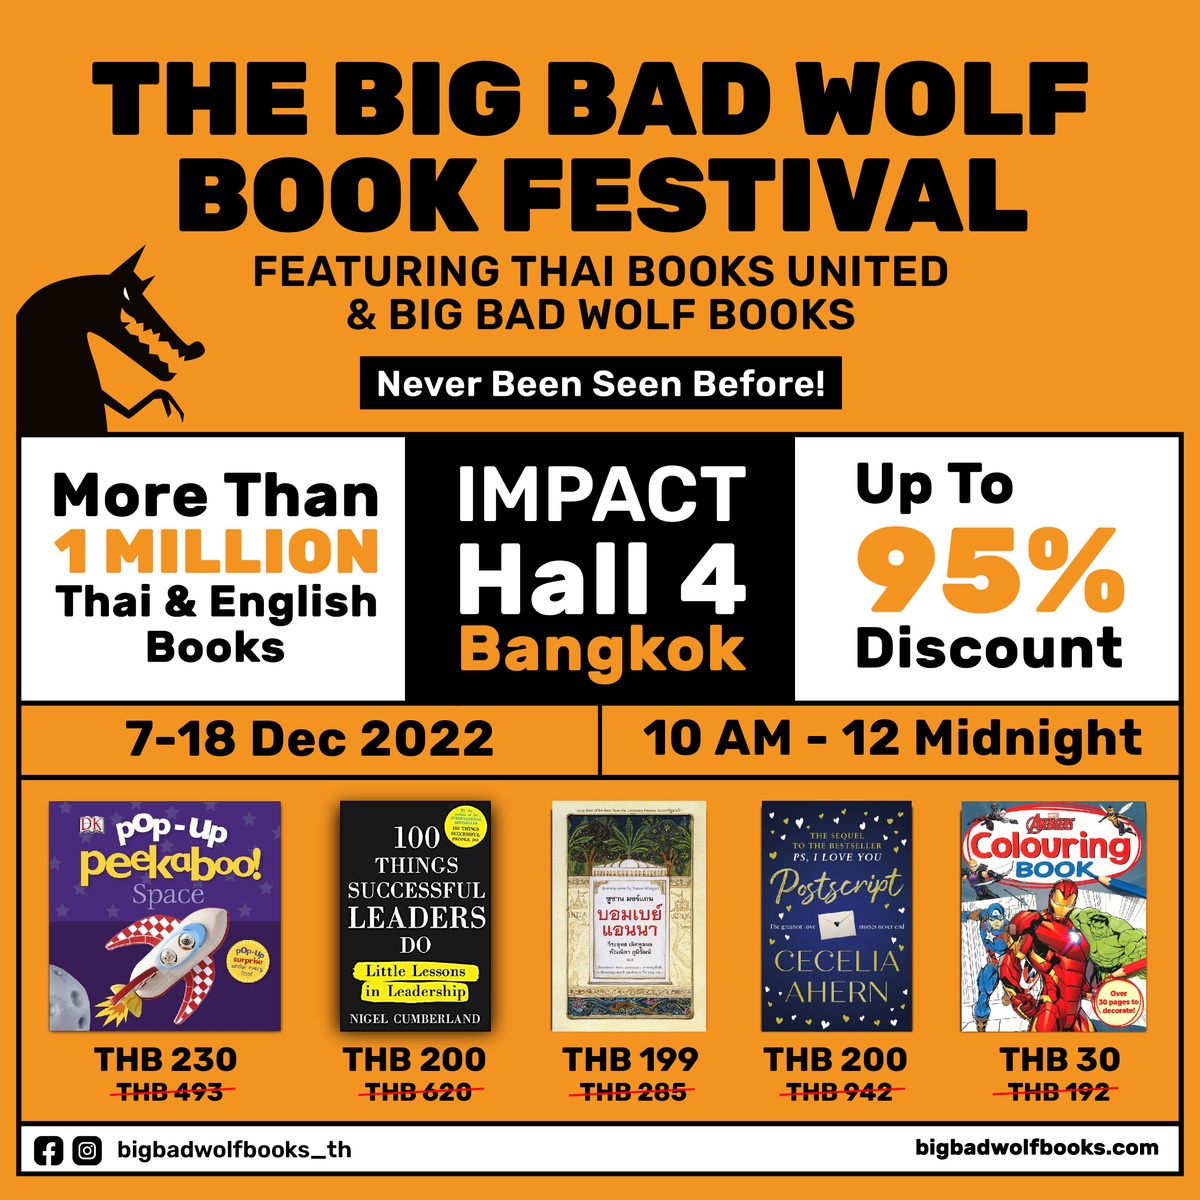 The Big Bad Wolf Book Festival